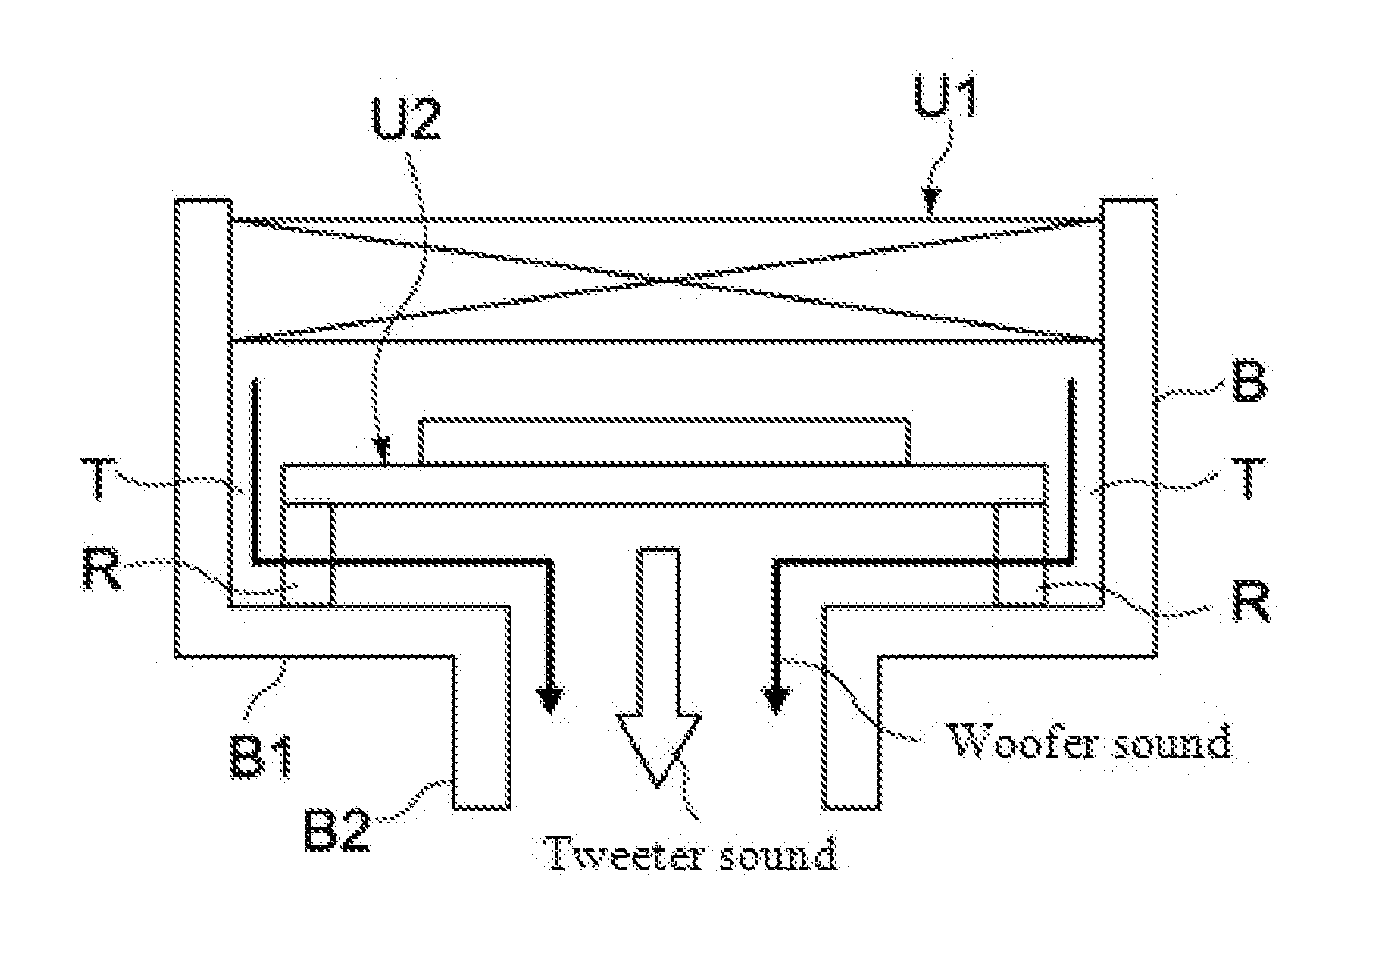 Electroacoustic converter and electronic device